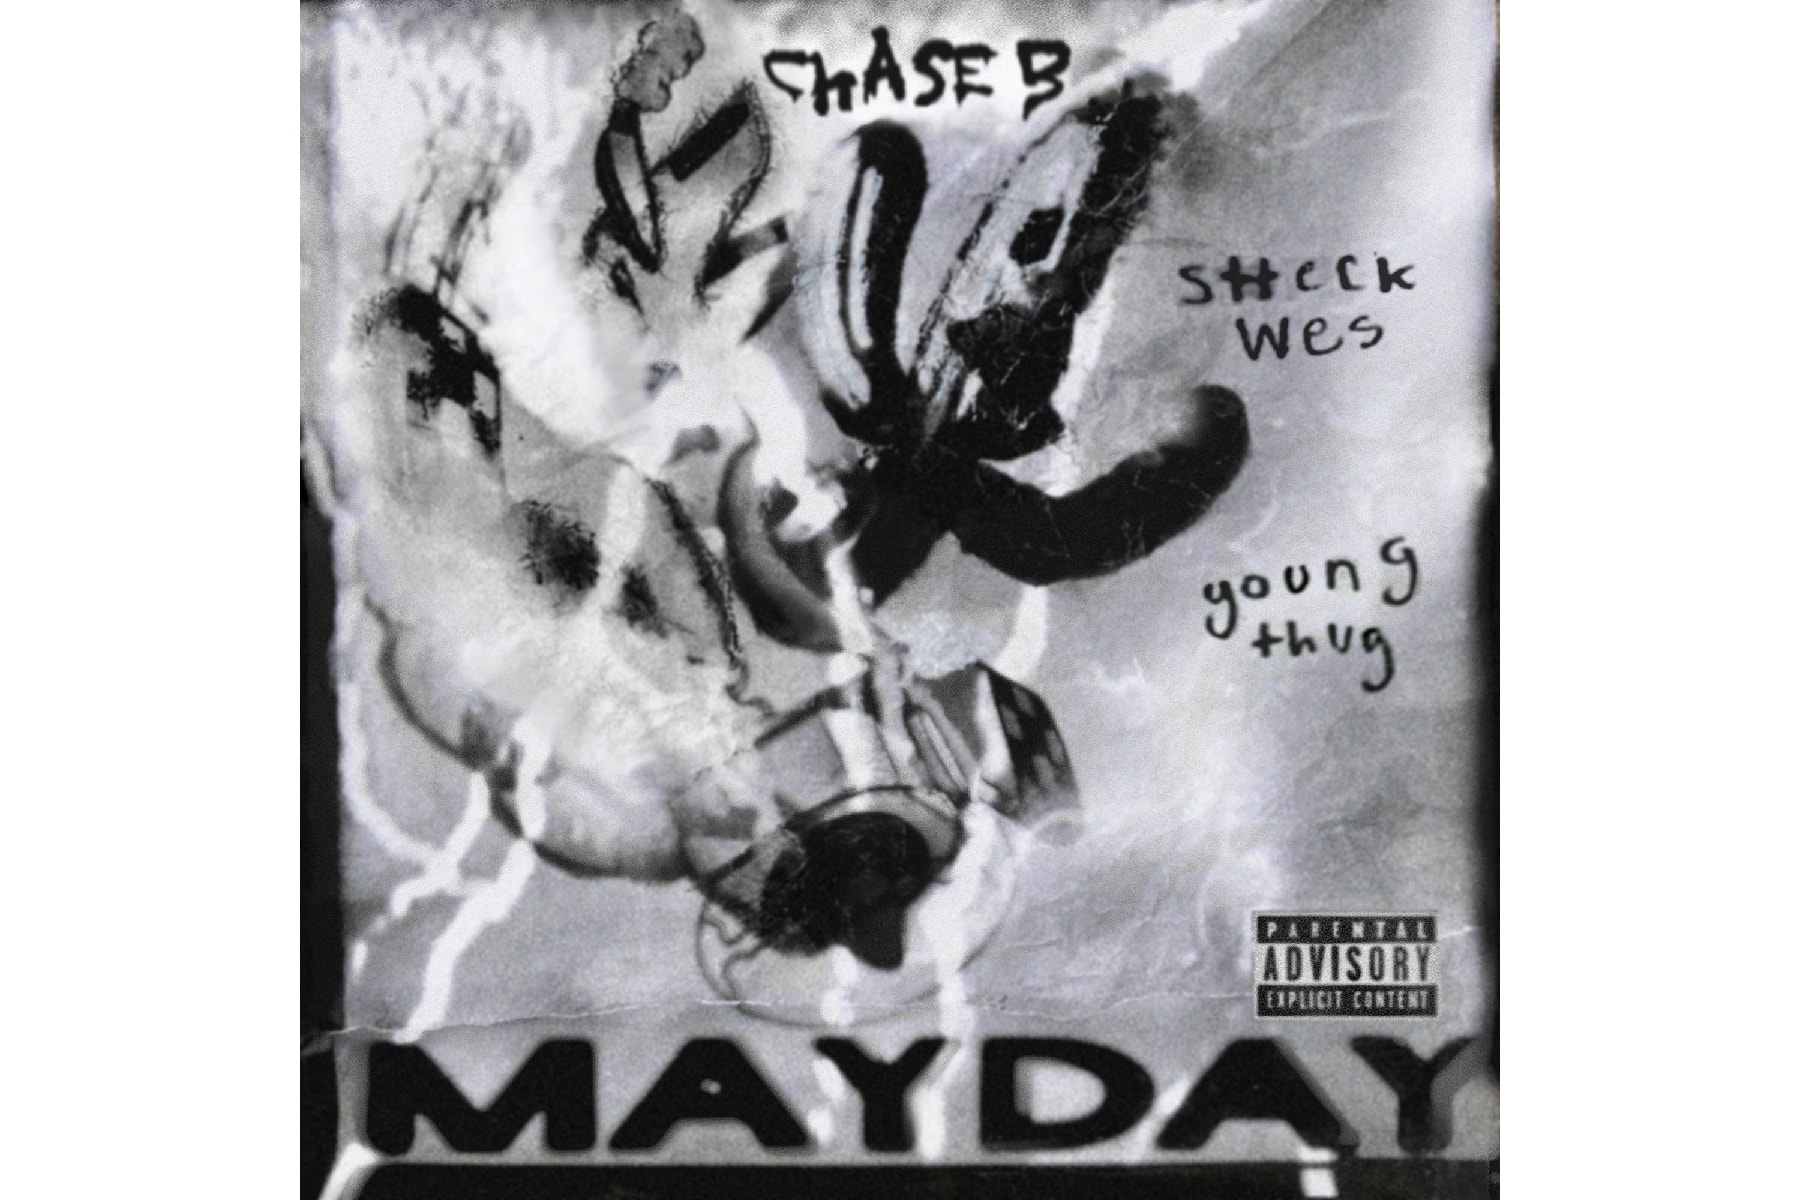 Sheck Wes Young Thug Chase B MAYDAY Stream 2019 New Track Single Song Travis Scott